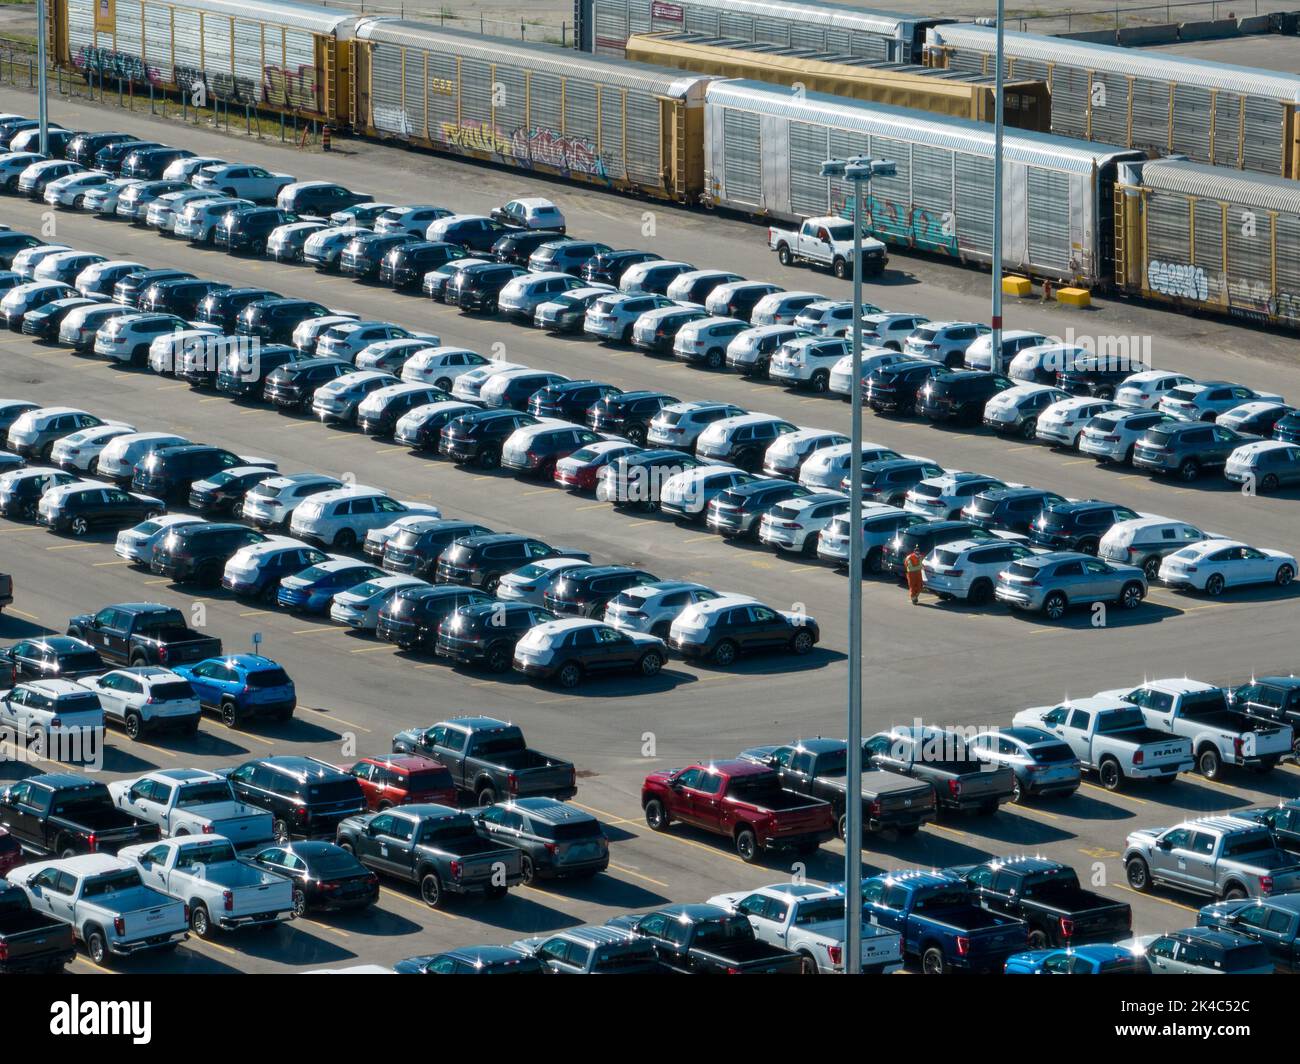 A high aerial view of an auto distribution and homologation center, located next to freight train cars on a sunny day. Stock Photo